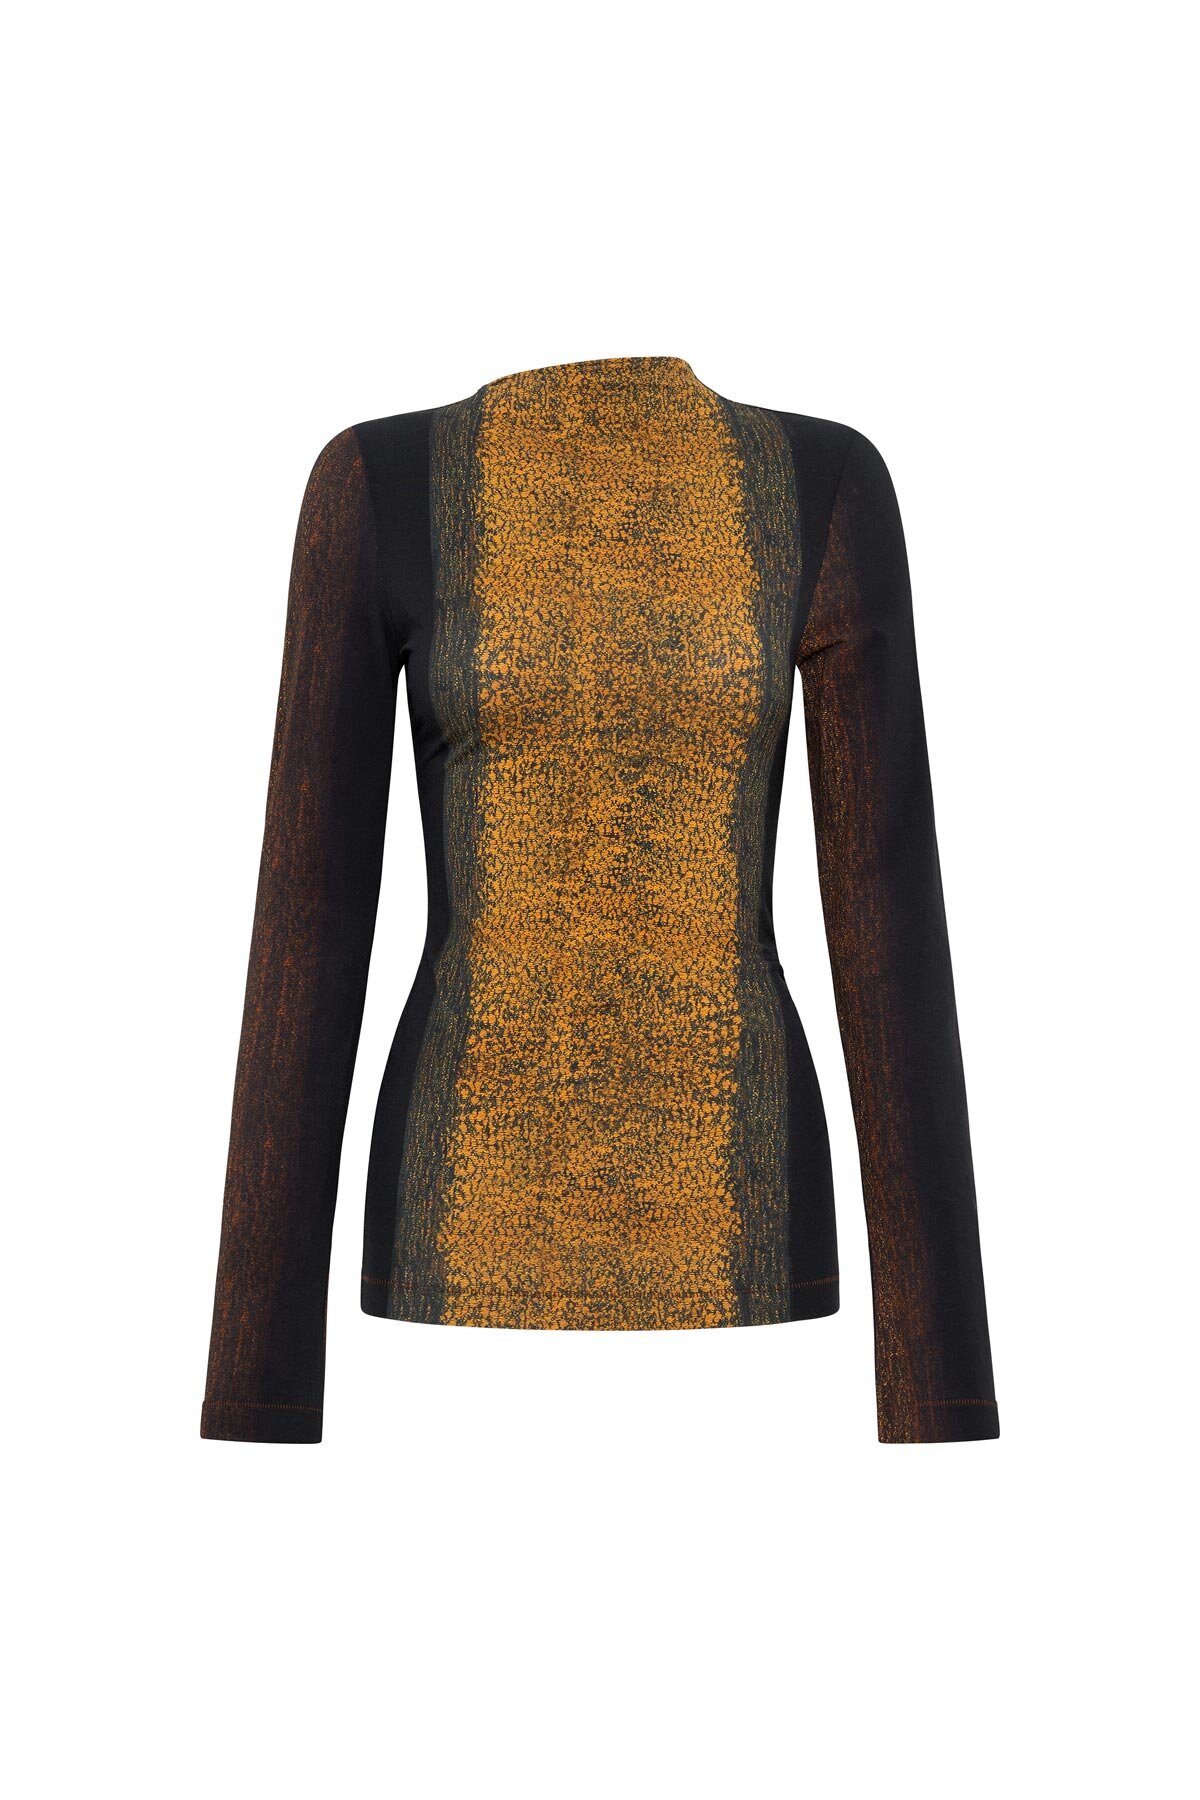 Camilla and Marc SERPENTINE LONG SLEEVE Top - Brand-Camilla and Marc :  Diahann Boutique - Camilla and Marc W23